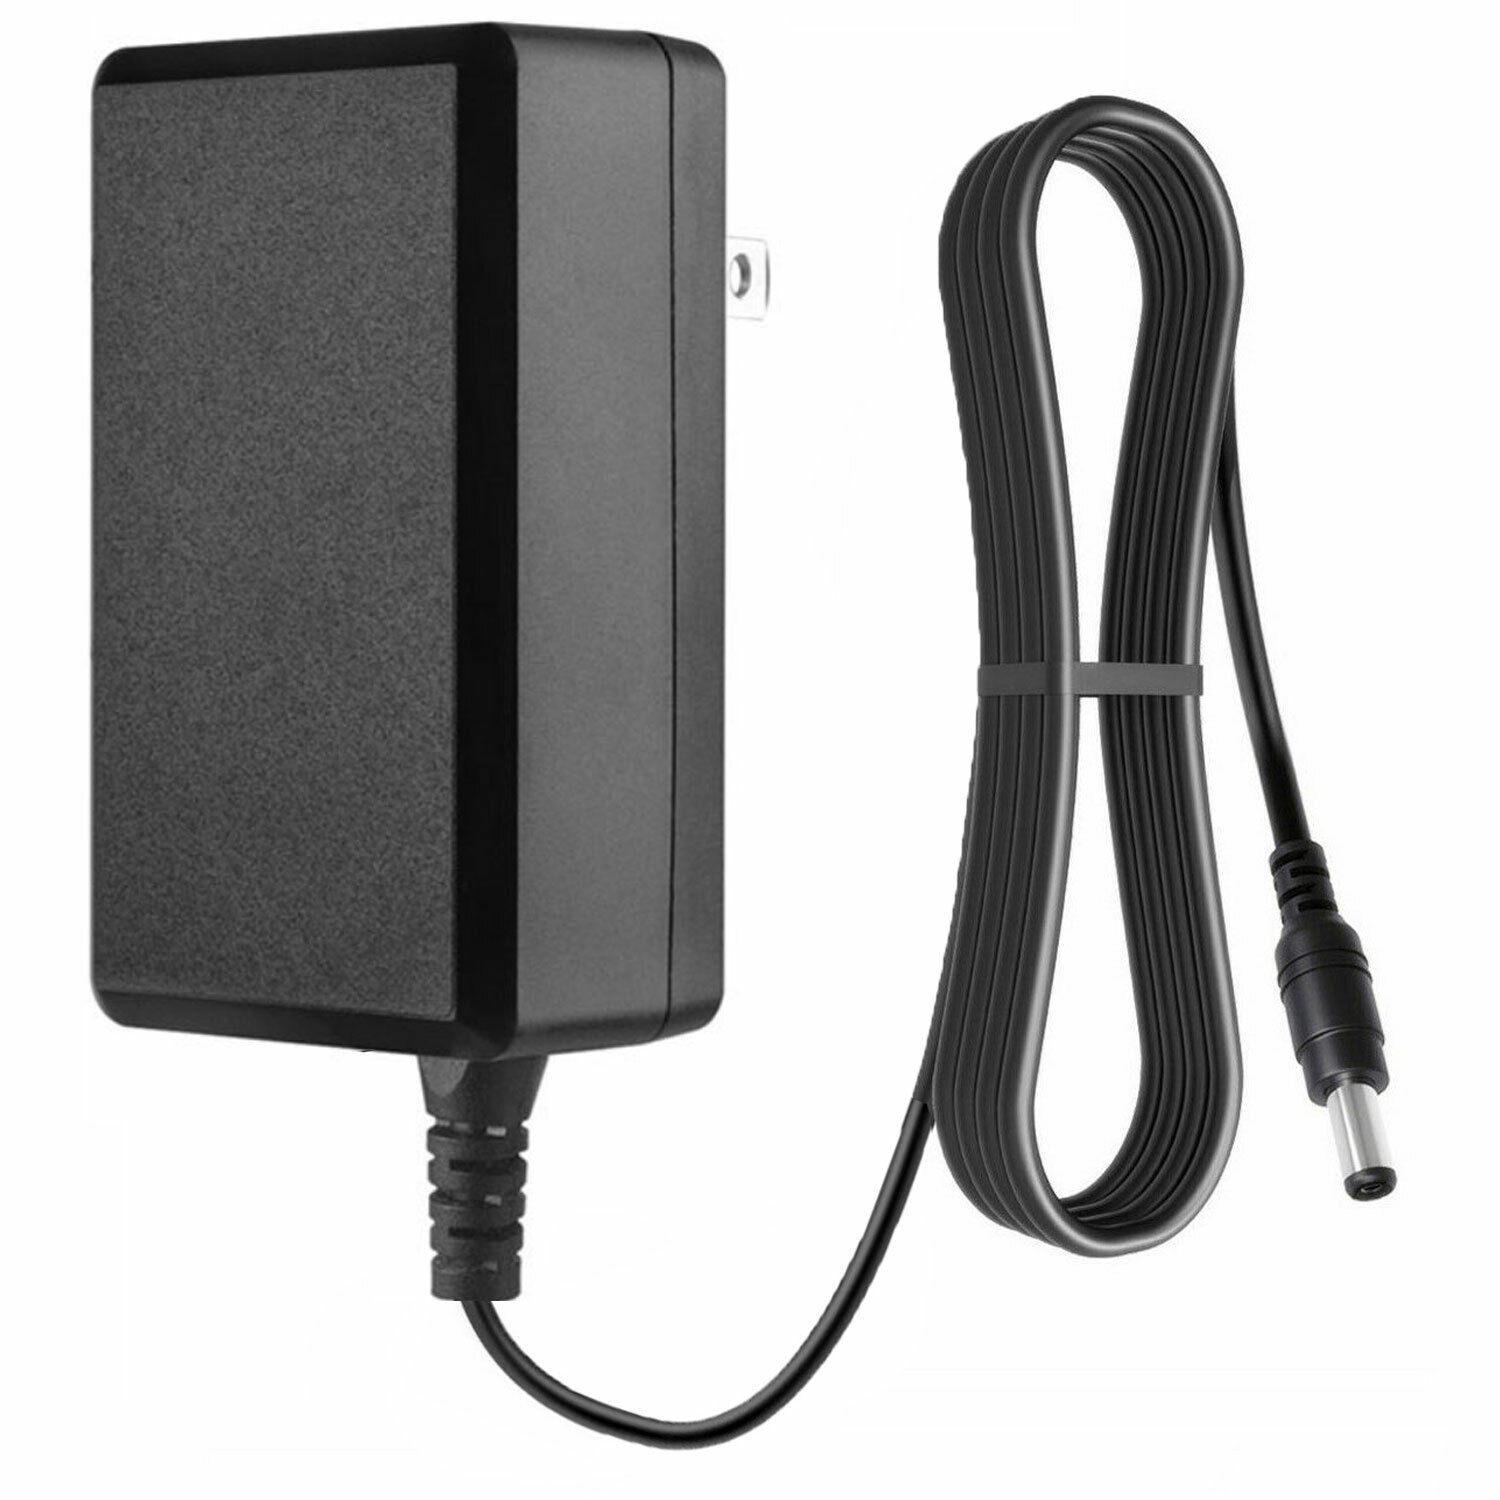 Power Adapter Supply for Bose Companion 20 Speaker System 329509-1300 PSM36W-180 Package includes: 1x Power Adapter